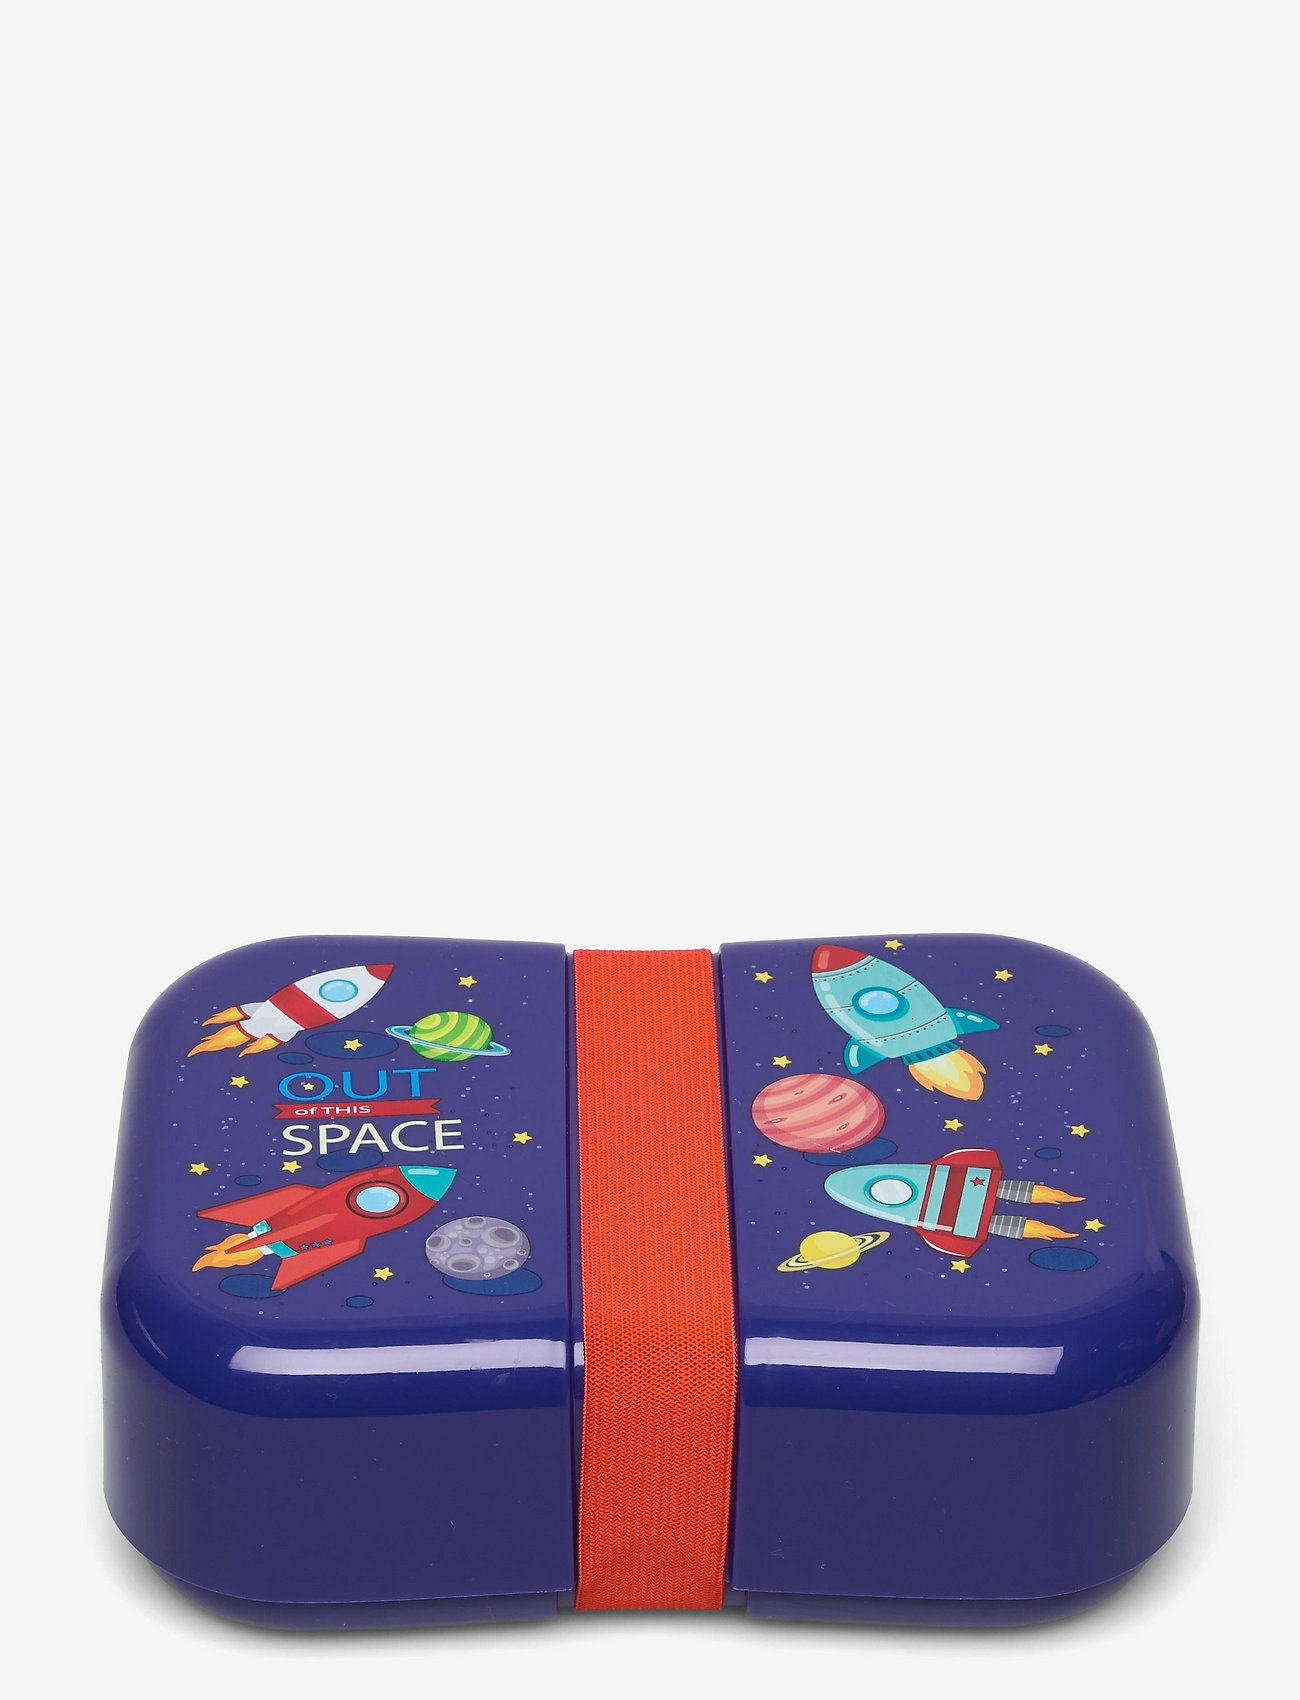 Euromic - OUT OF SPACE lunch box - lägsta priserna - blue - 0